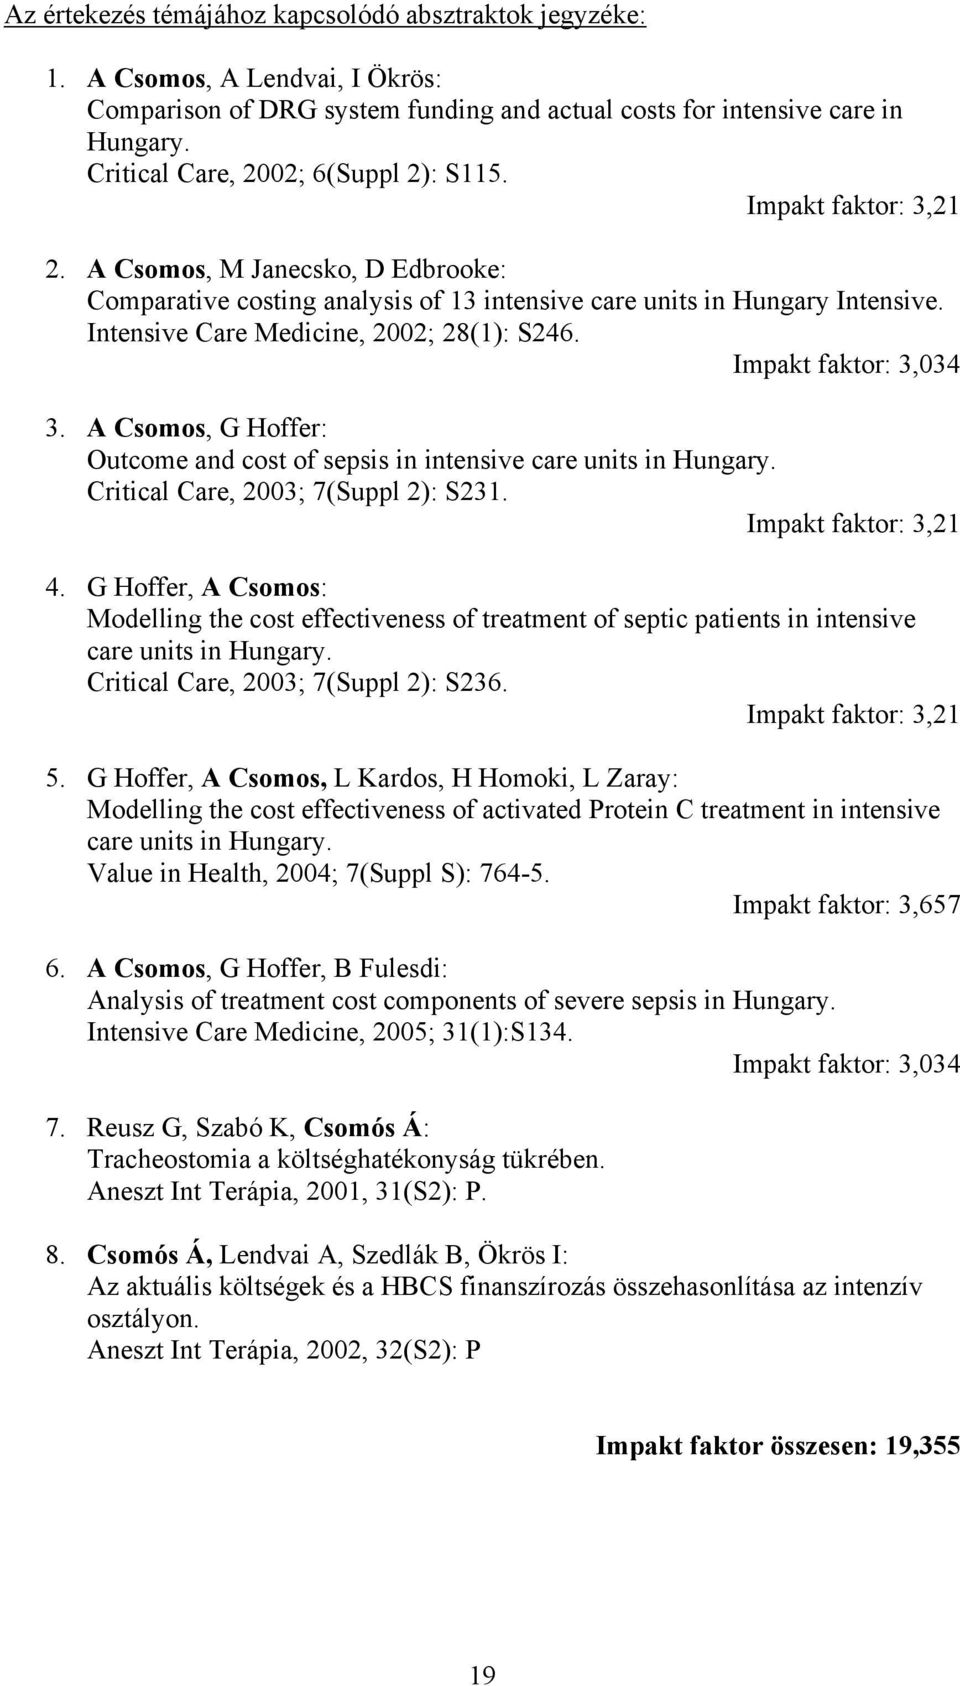 Intensive Care Medicine, 2002; 28(1): S246. Impakt faktor: 3,034 3. A Csomos, G Hoffer: Outcome and cost of sepsis in intensive care units in Hungary. Critical Care, 2003; 7(Suppl 2): S231.